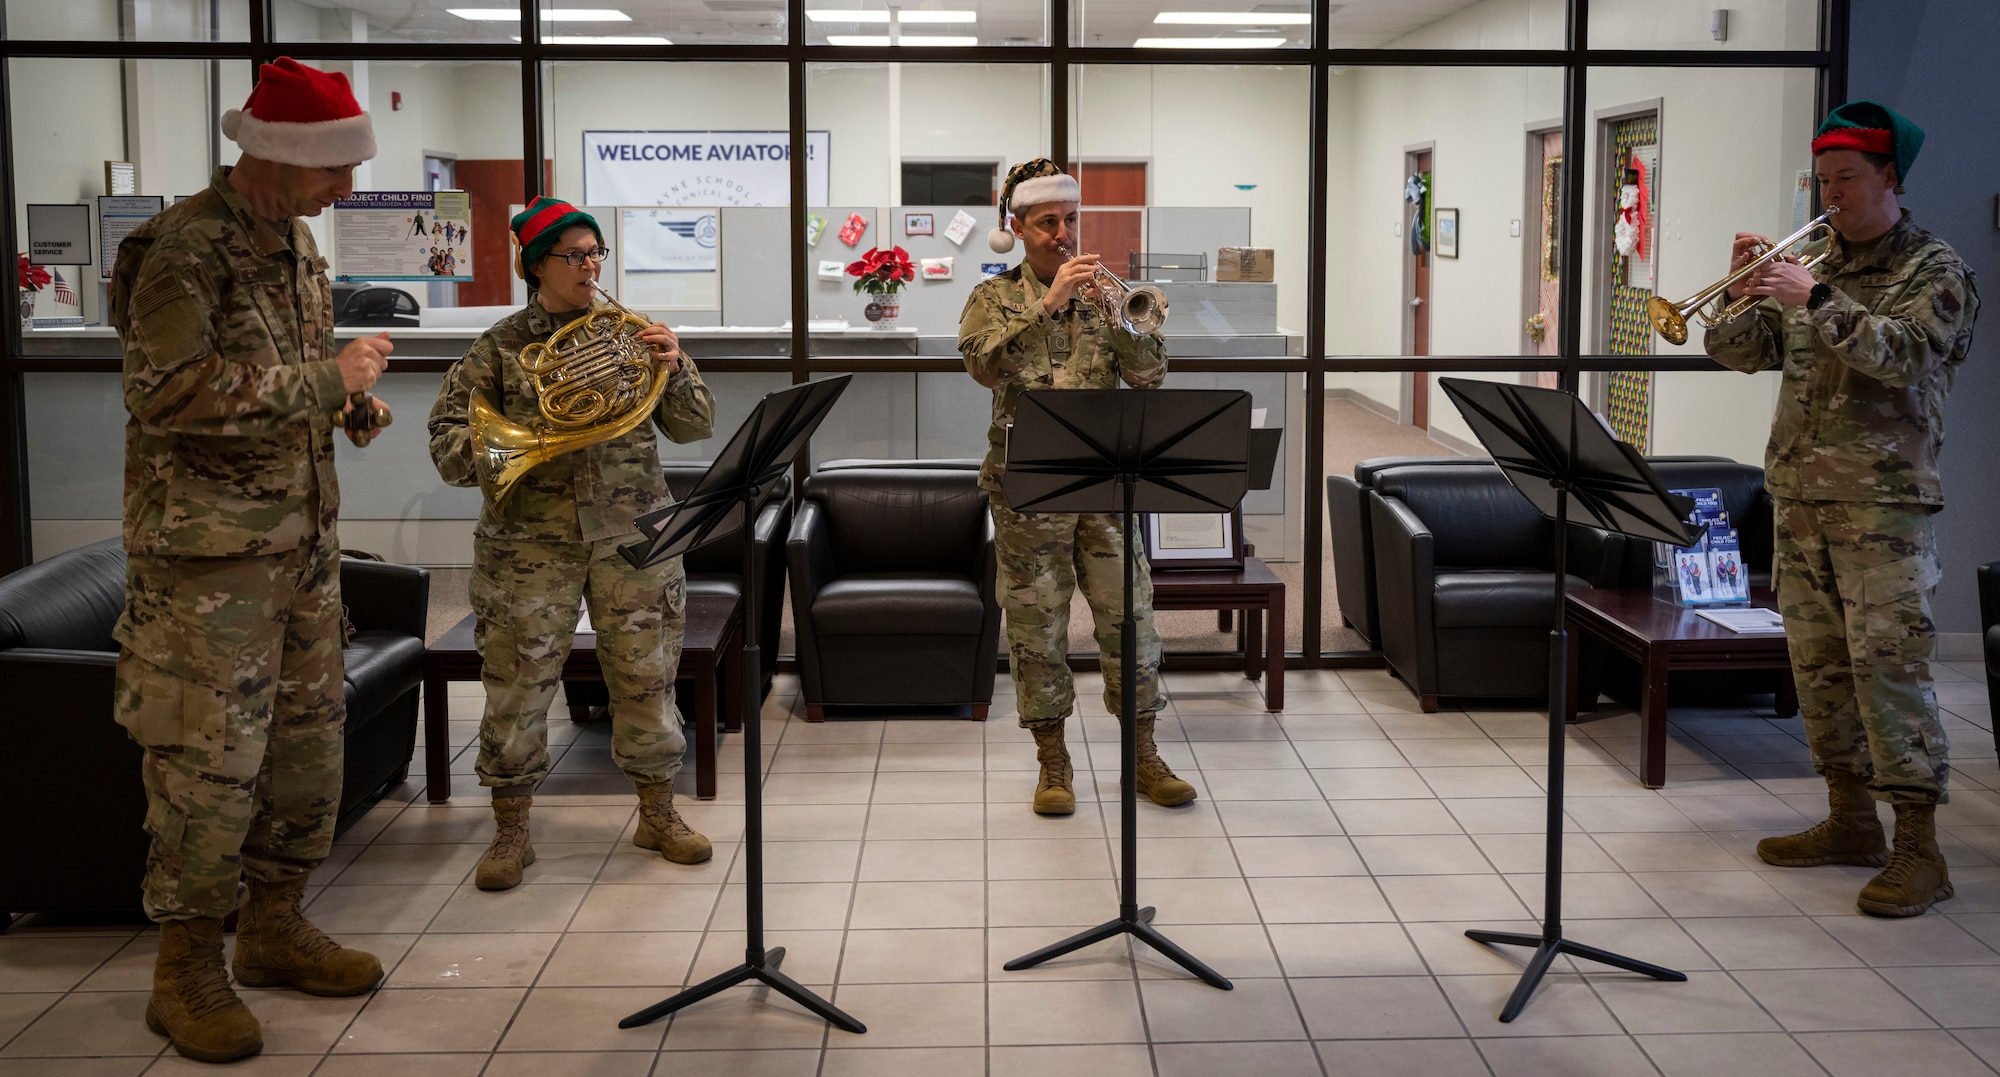 Members of the U.S. Air Force Heritage of America band brass quartet perform for the Wayne School of Technical Arts at Seymour Johnson Air Force Base, North Carolina, Dec. 14, 2022.  The Heritage of America Band’s goal is to inspire diverse audiences by displaying the highest level of professionalism while epitomizing military precision and excellence.